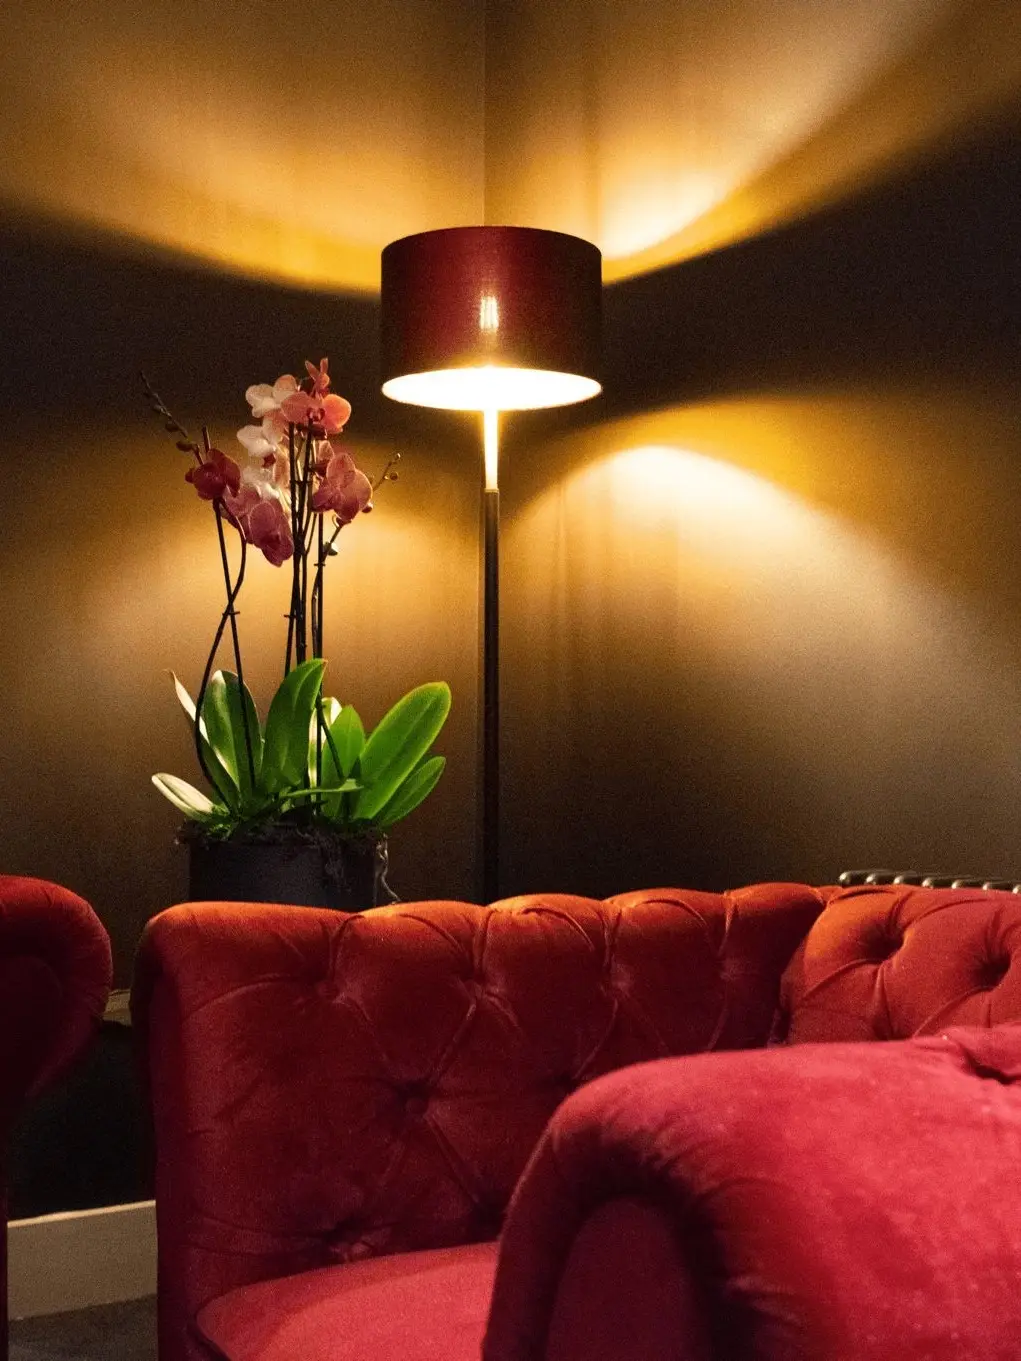 A red armchair with a lamp in the background